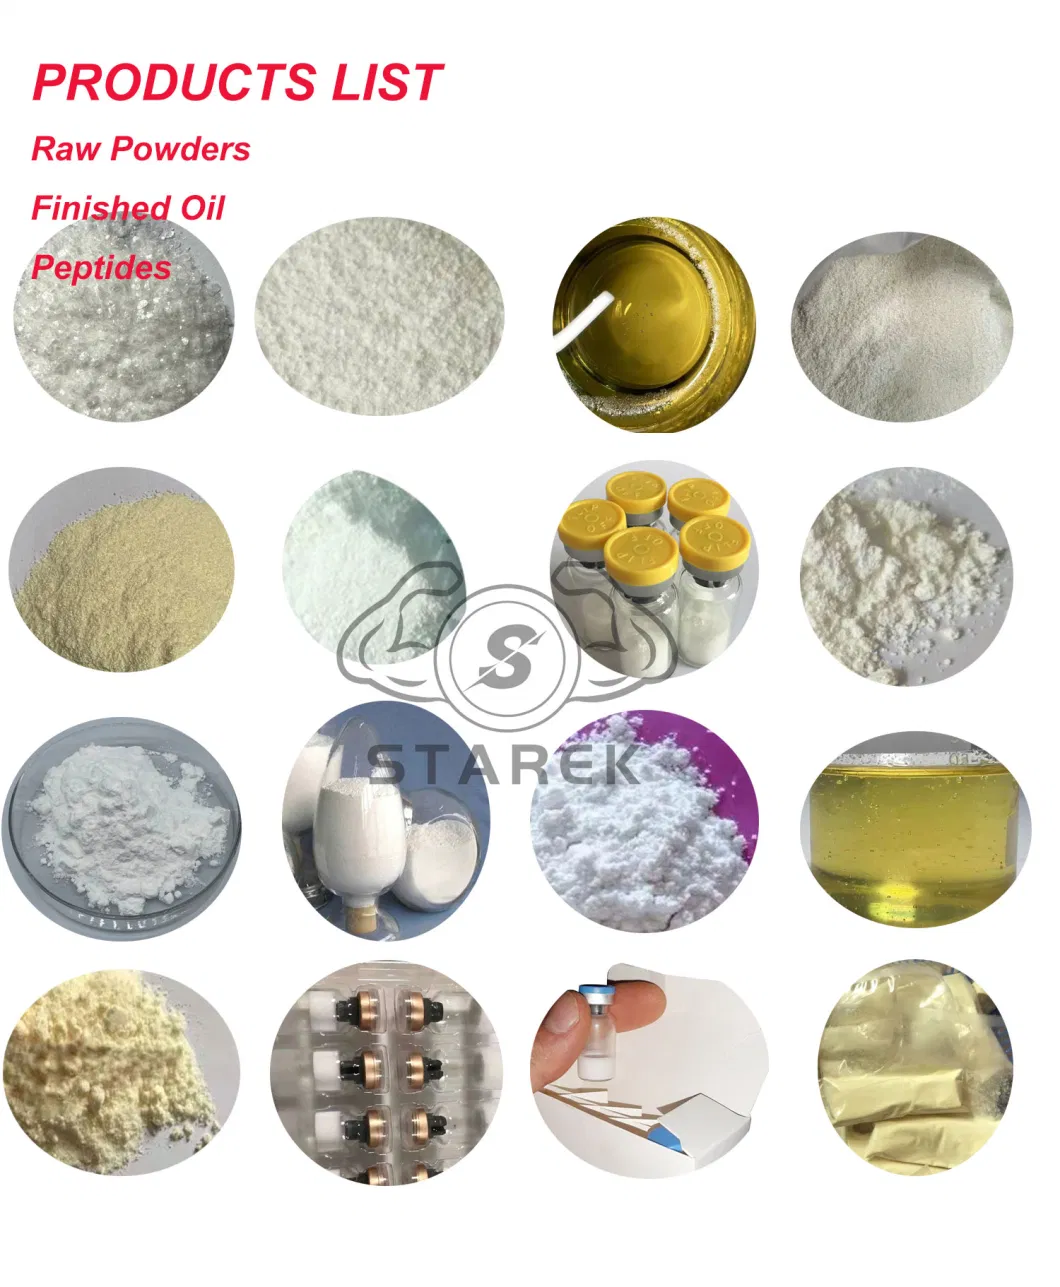 Pharmaceutical Chemicals Raw Powder with Ameria Russia UK Europe Domestic Shipping